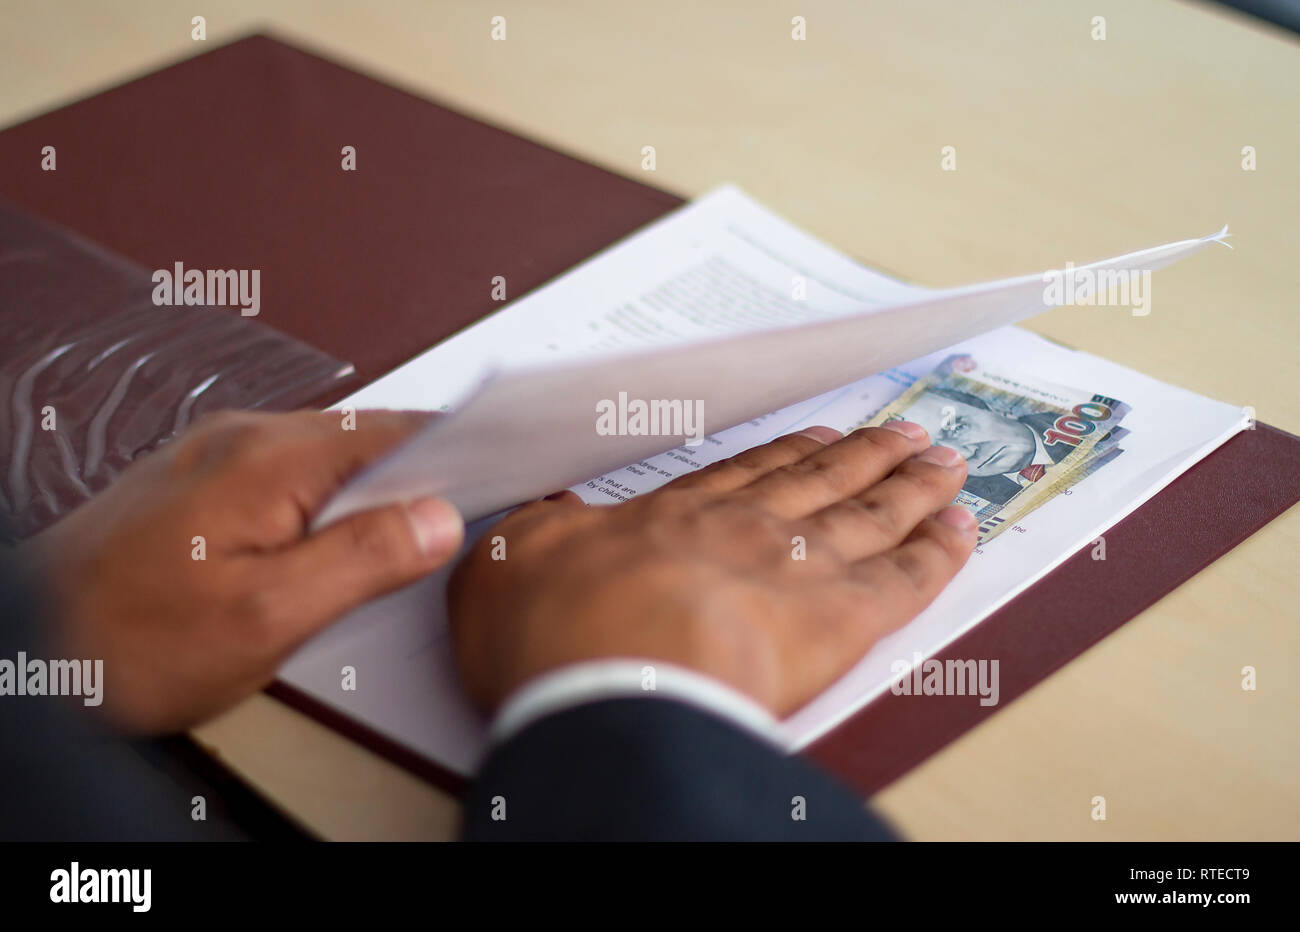 Man accepting bribe under some contract papers, Peruvian soles currency in notes of 100 bills. Bribery and corruption concepts. Stock Photo